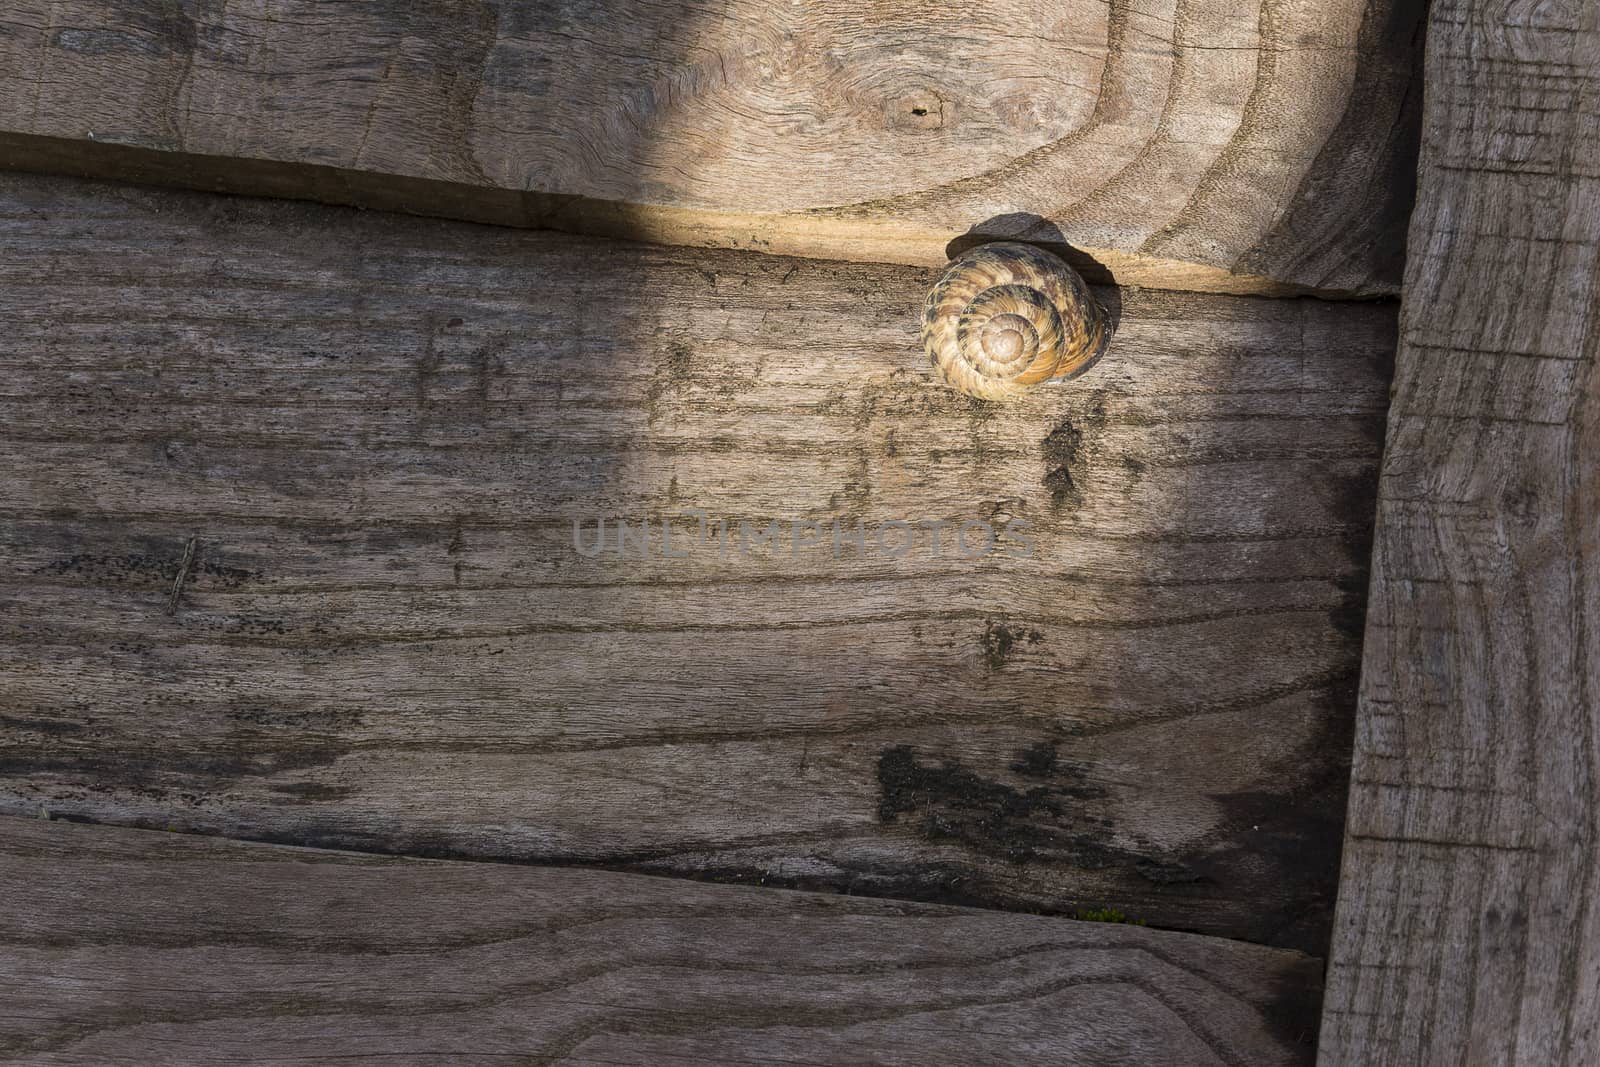 A small snail shell on weathered wood door.







A small snail shell